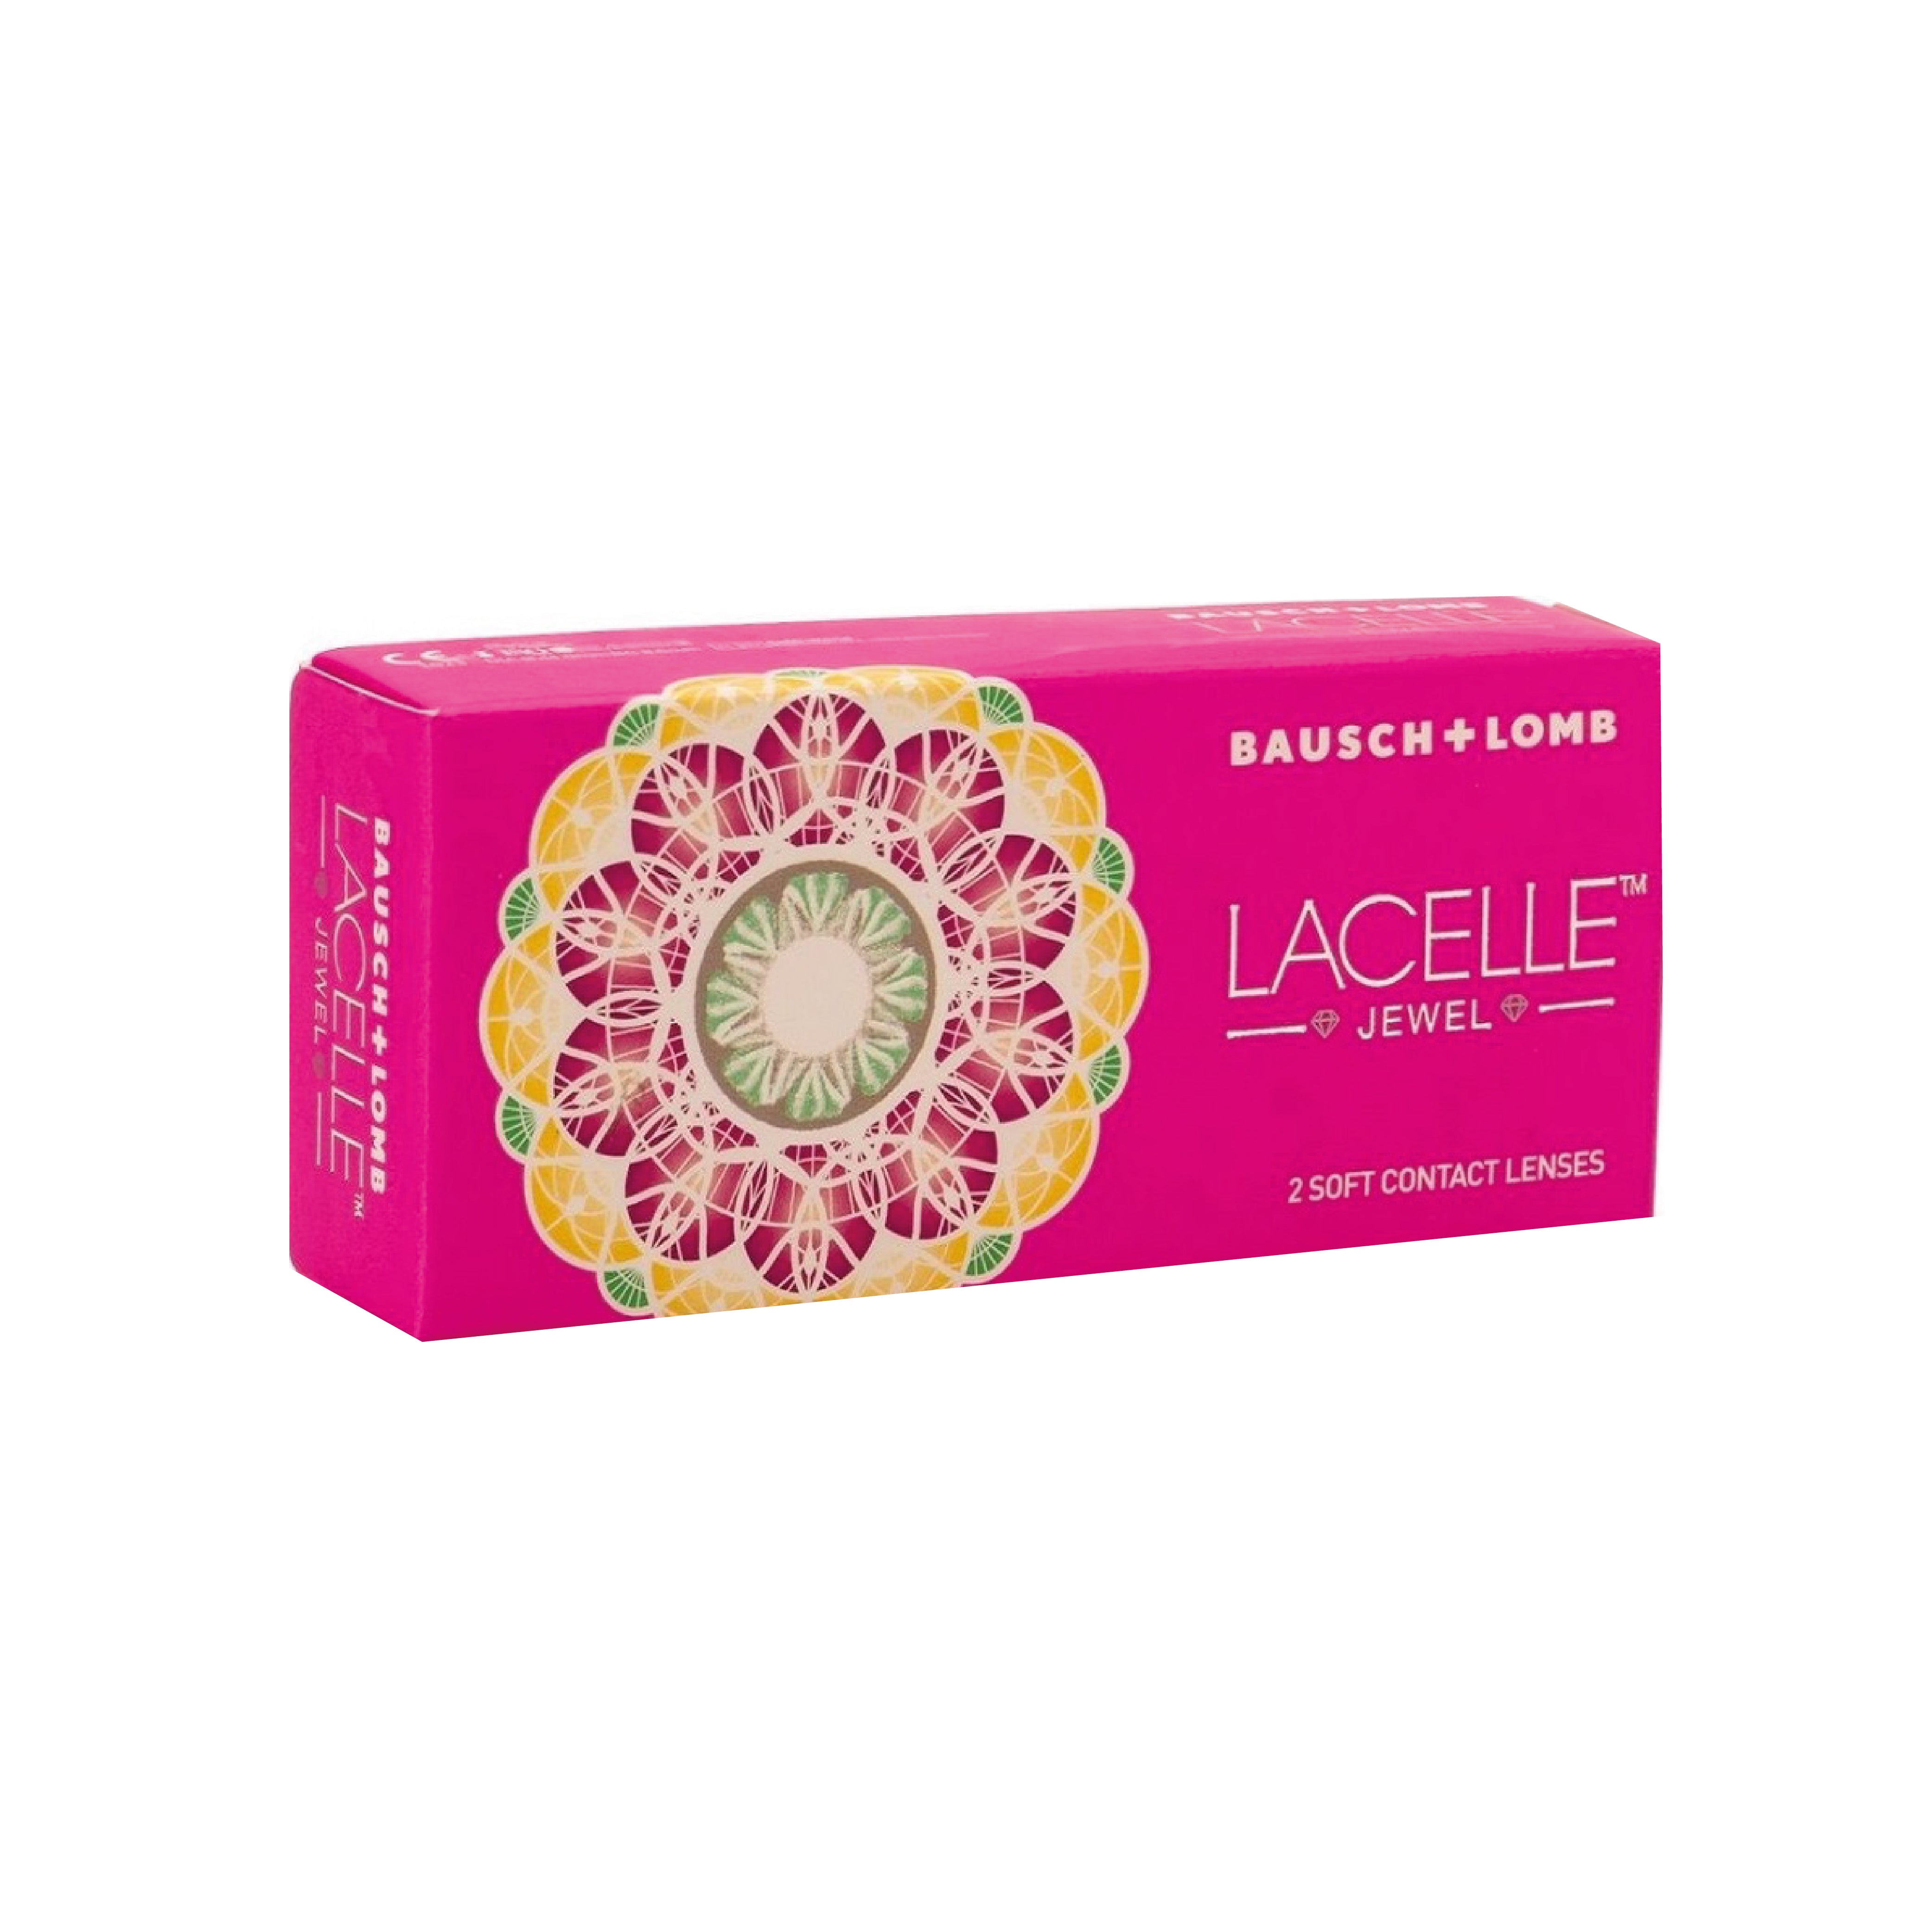 Bausch & Lomb Lacelle Jewel - Amber Brown (2 Pack)